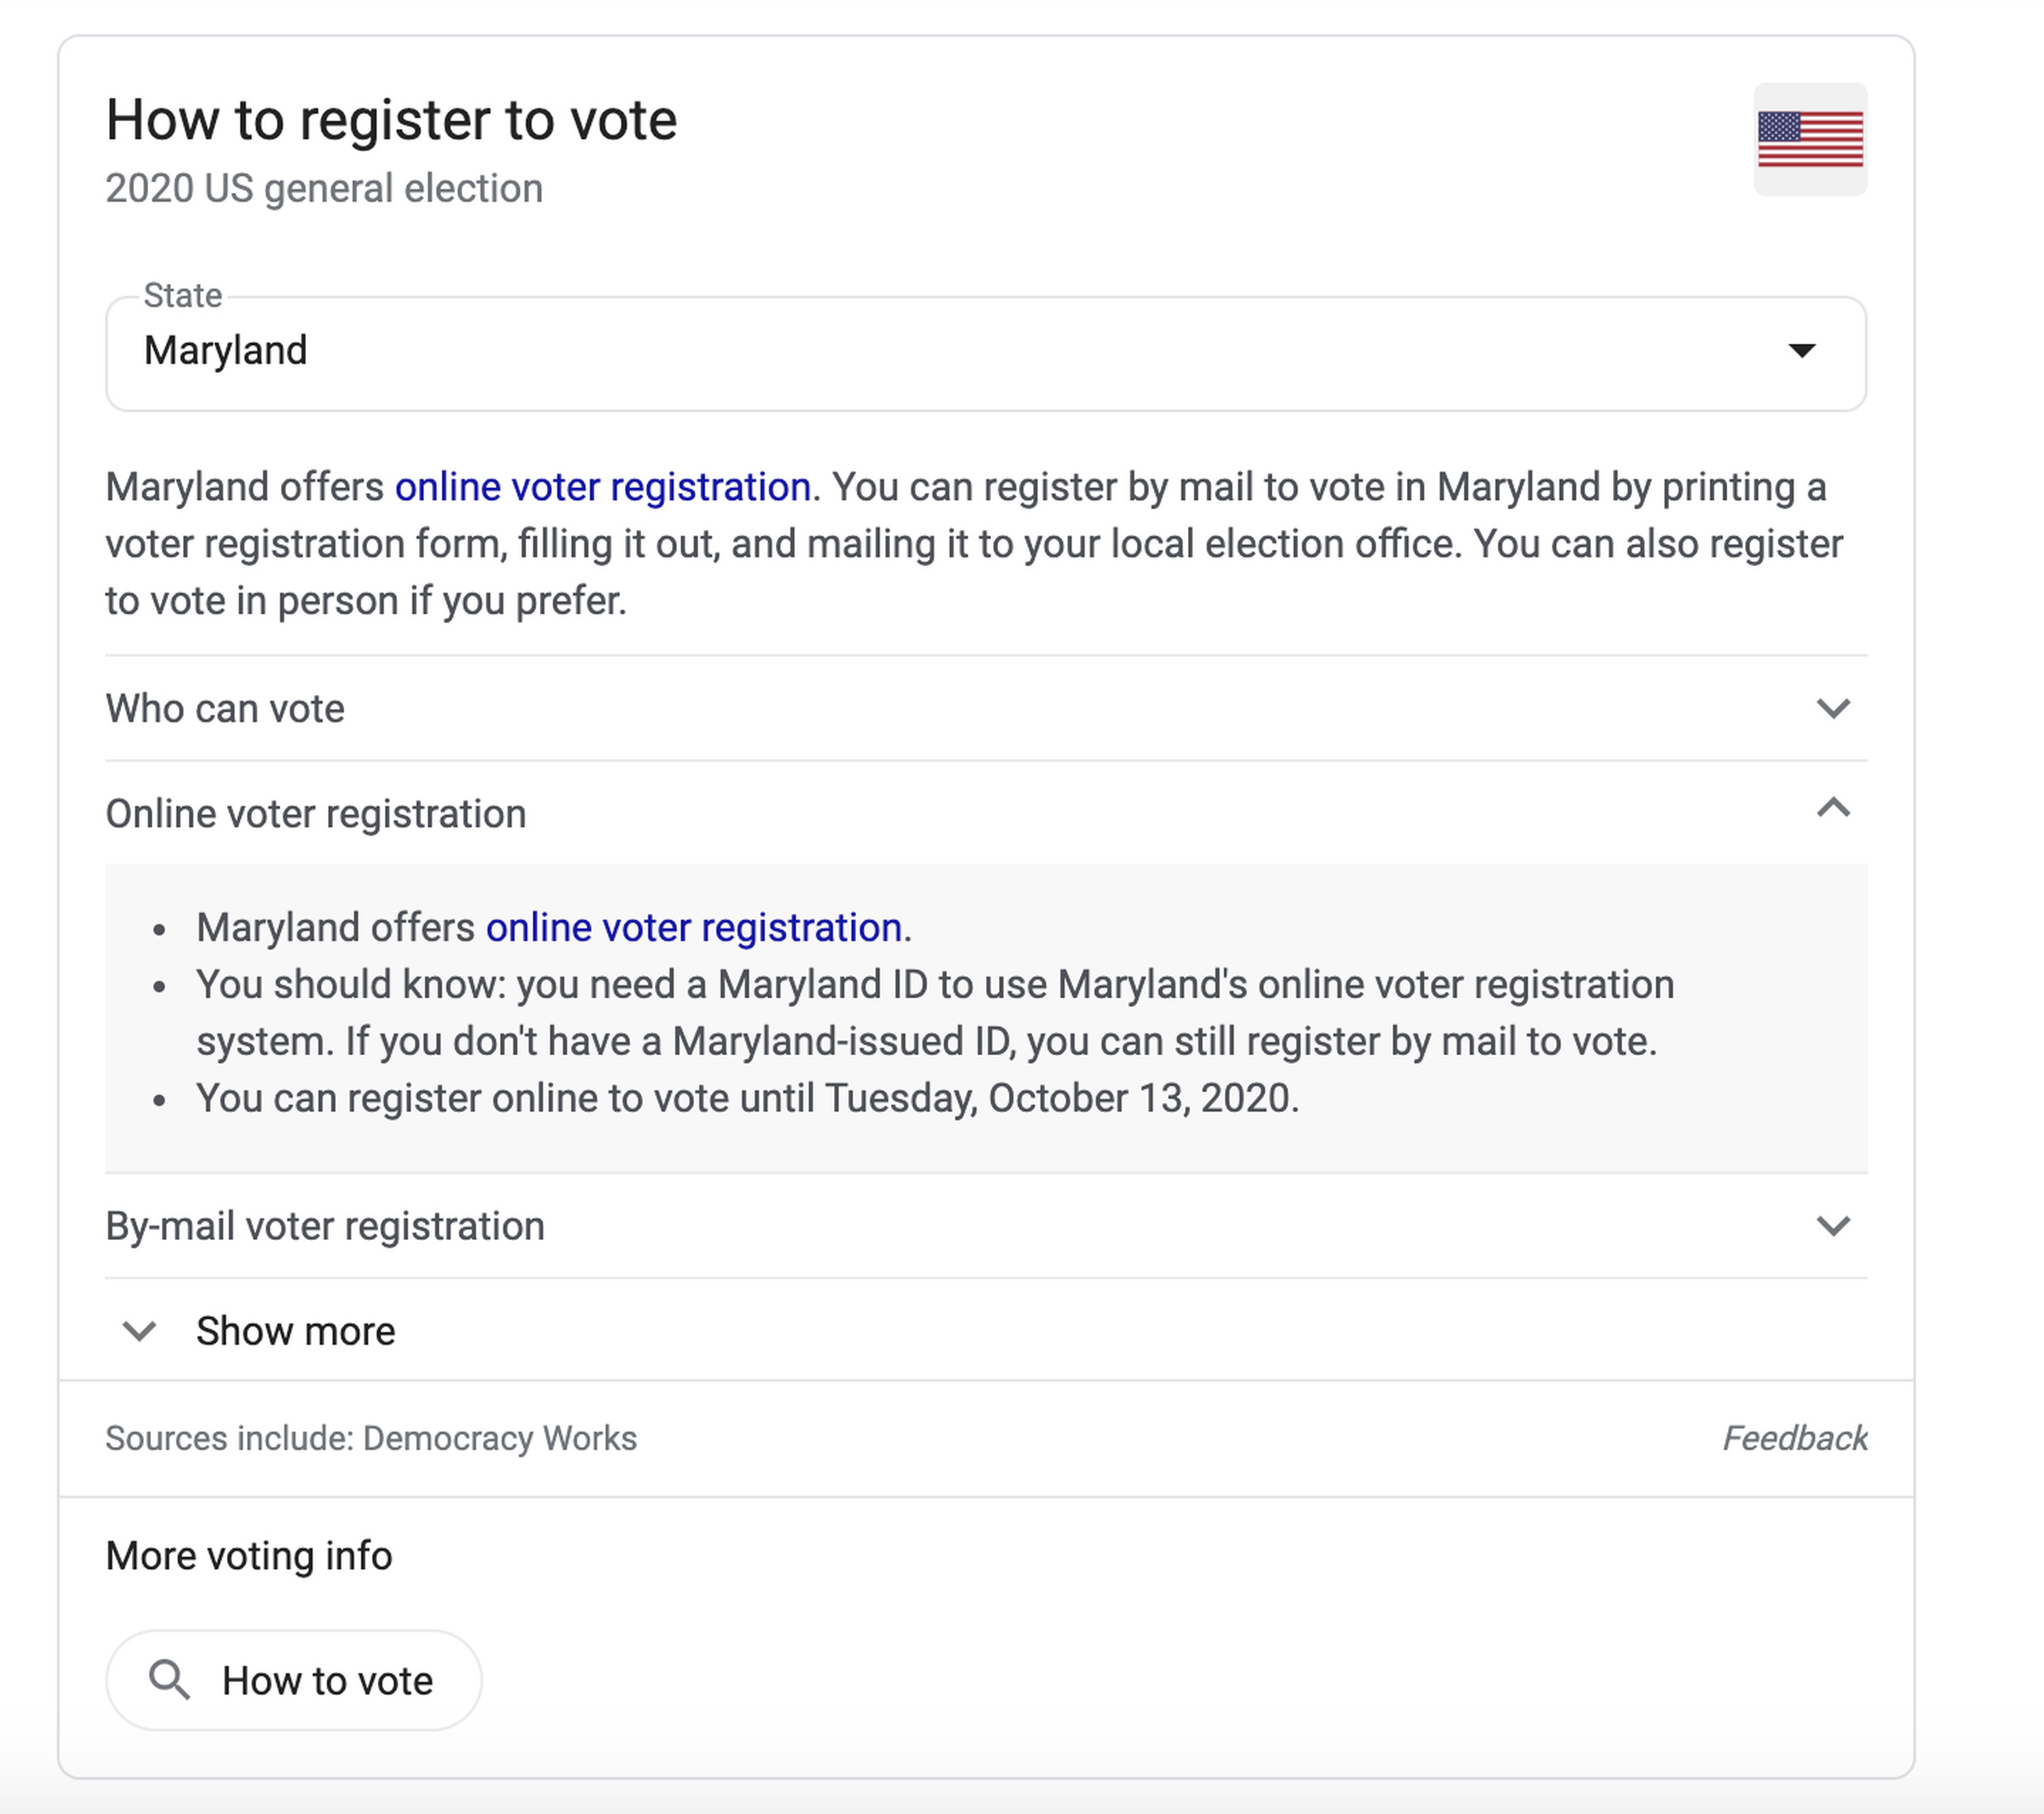 Google search provides detailed answers to questions you may have about registering or voting in your state.